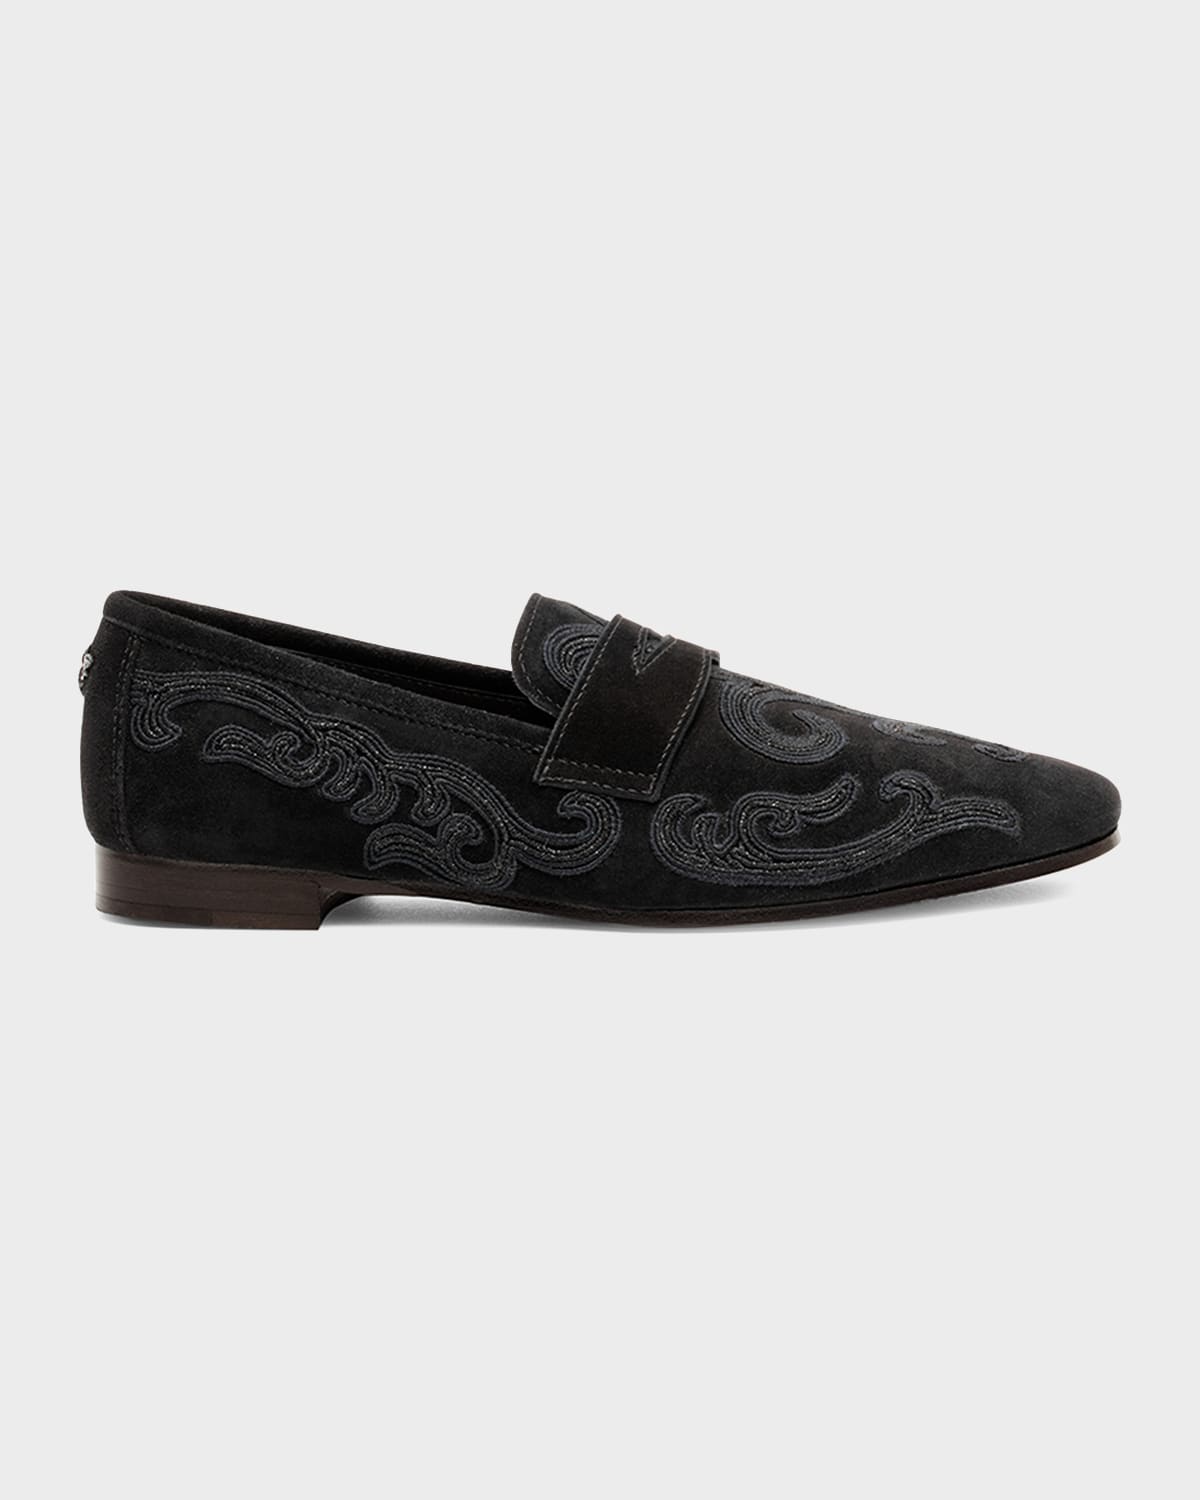 Flaneur Embroidered Suede Penny Loafers